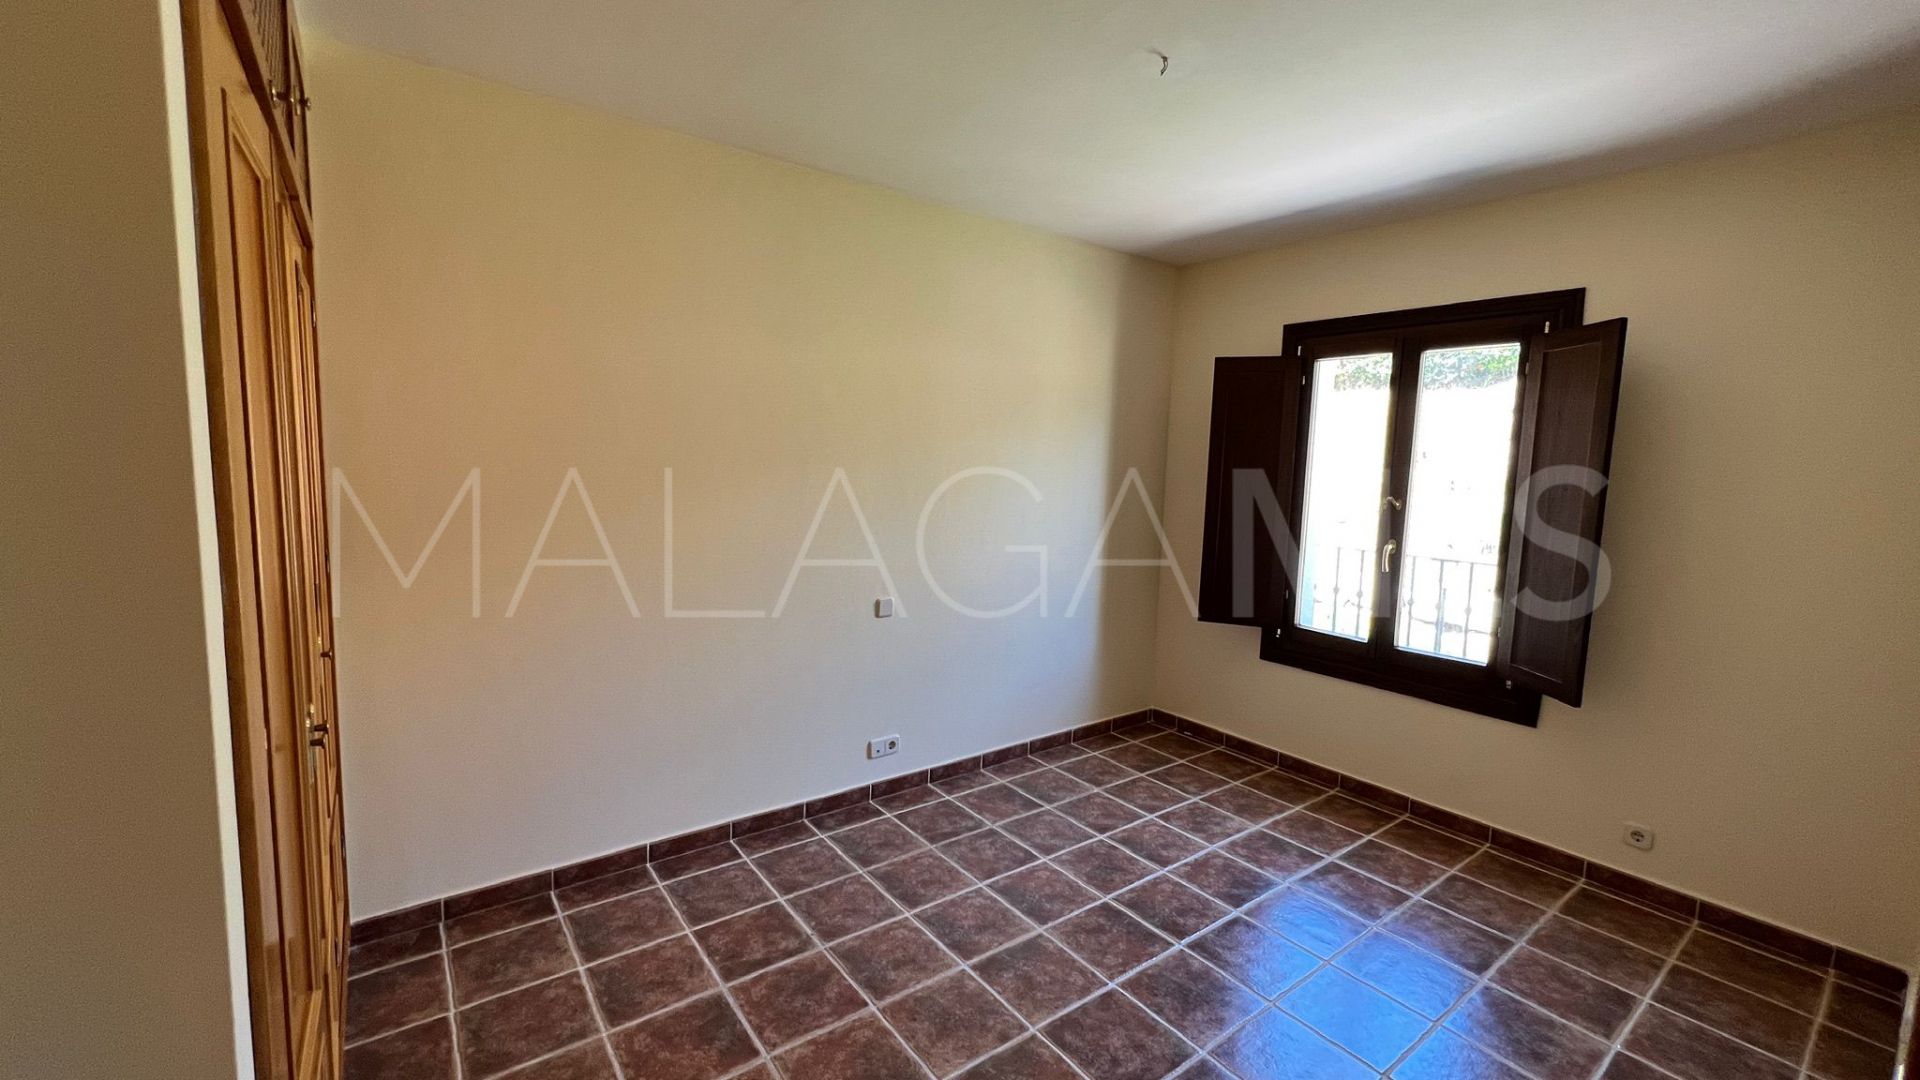 For sale semi detached house in Paraiso Barronal with 4 bedrooms